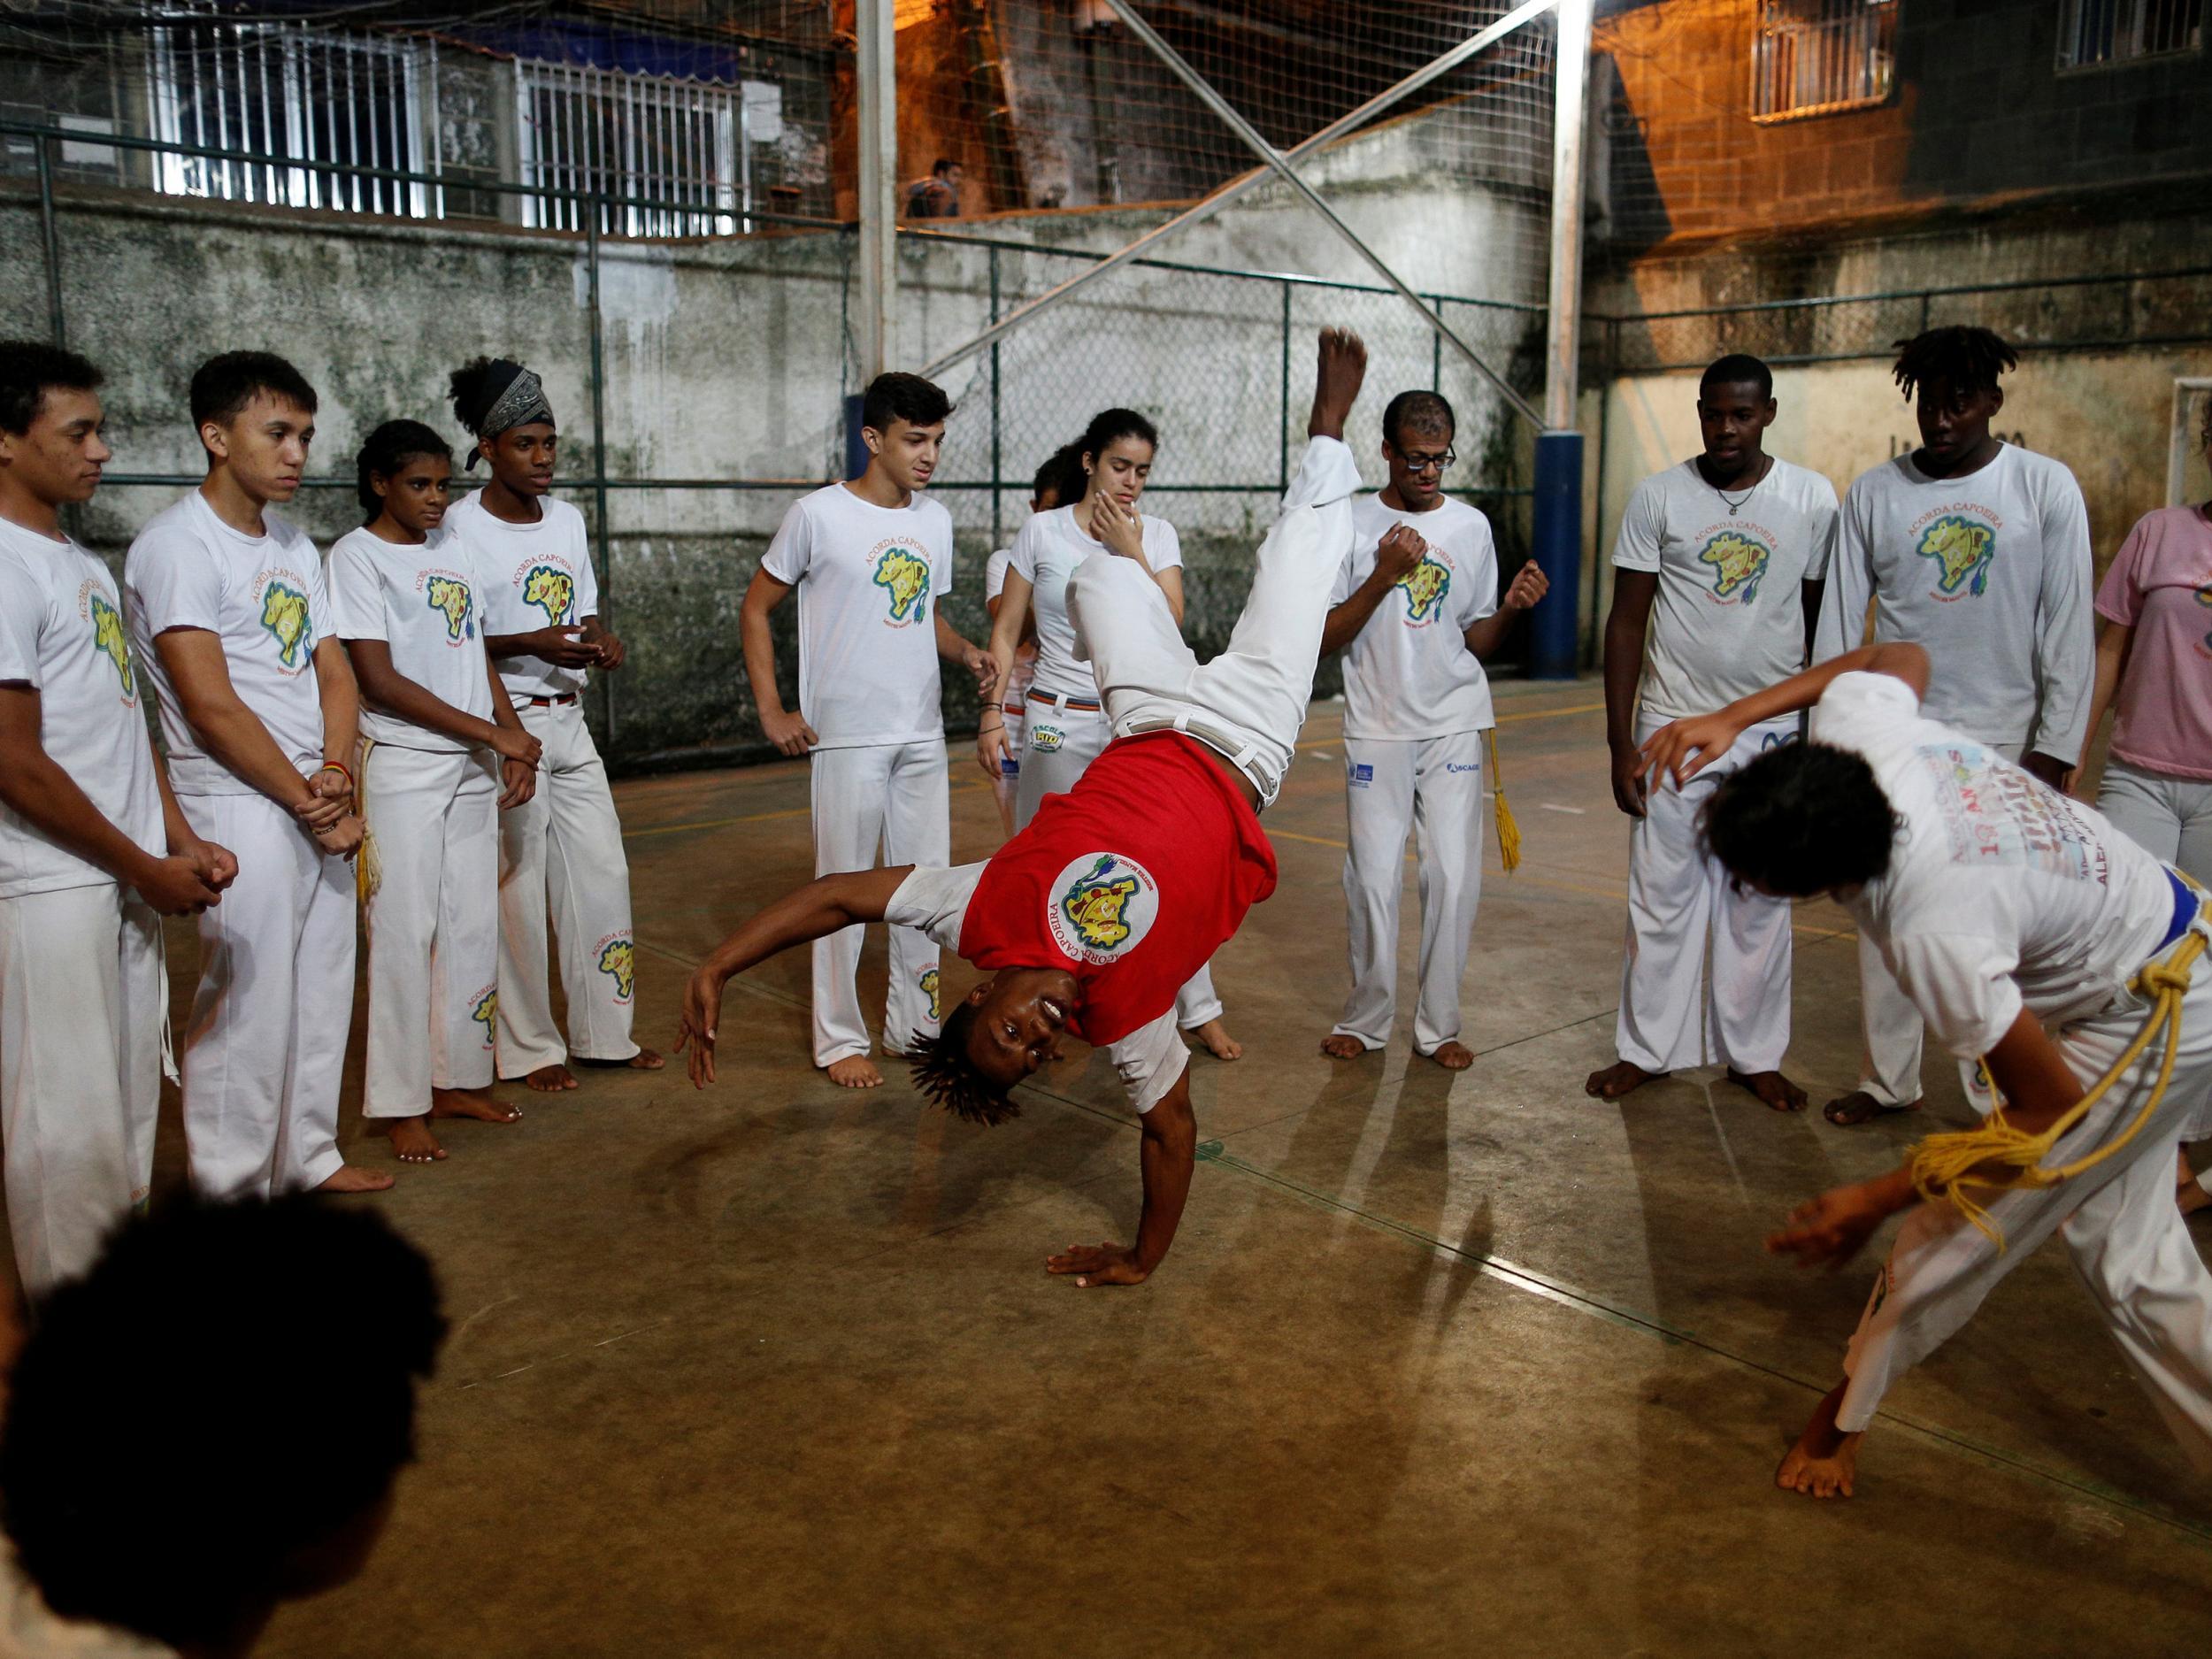 Members of the Acorda Capoeira group train at a local school